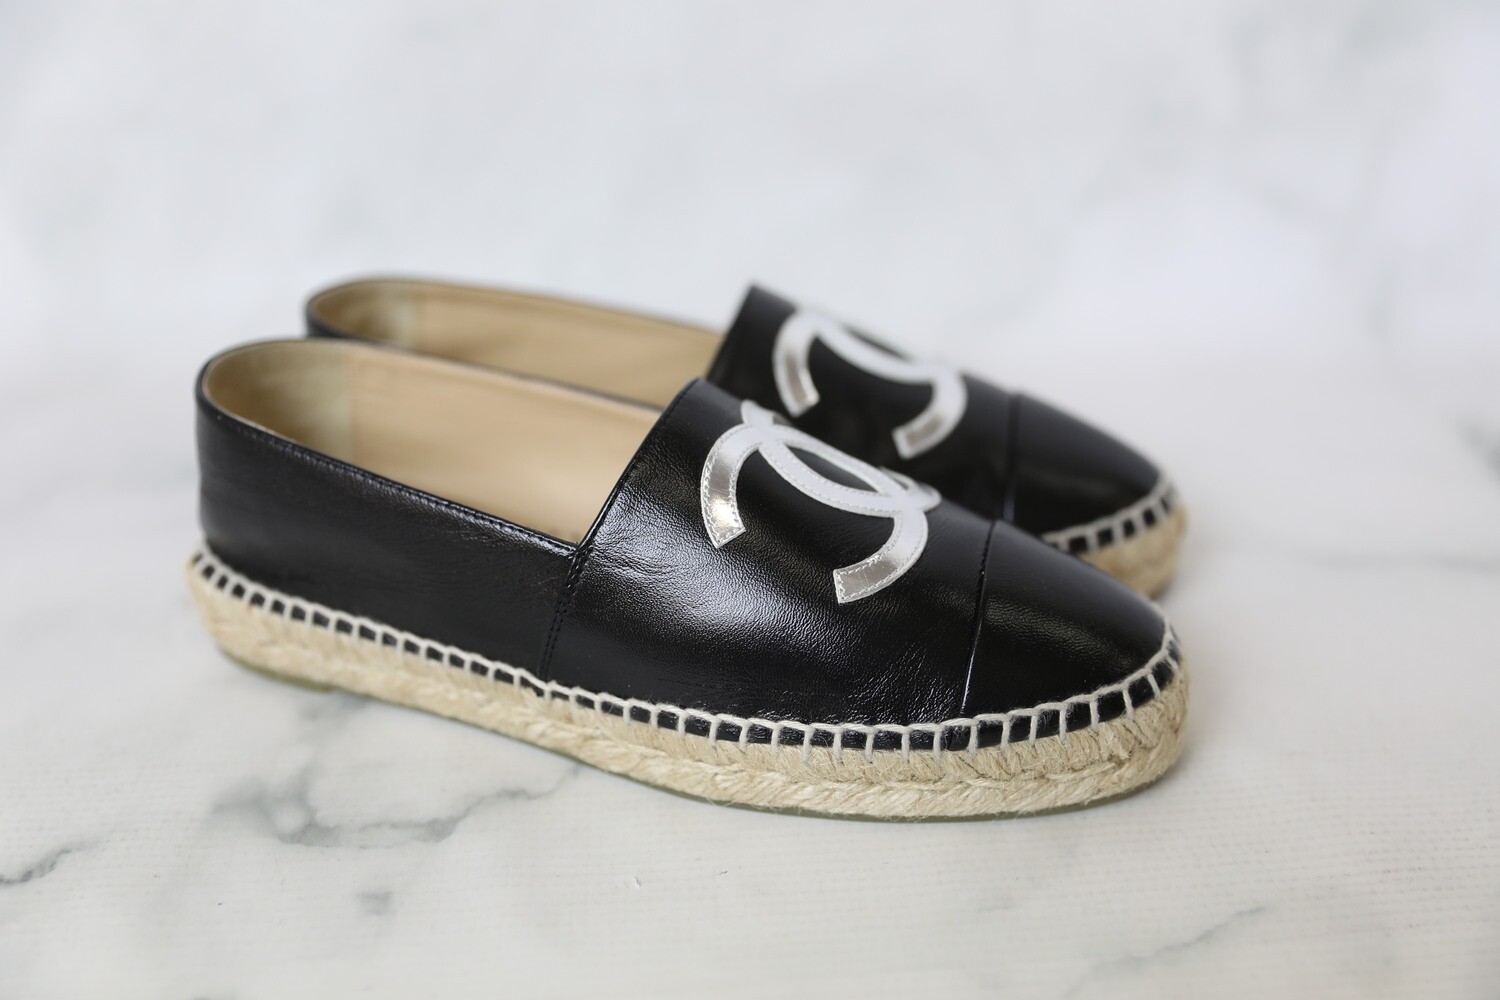 Chanel Shoes Espadrilles, Black with Silver CC, Size 38, New in